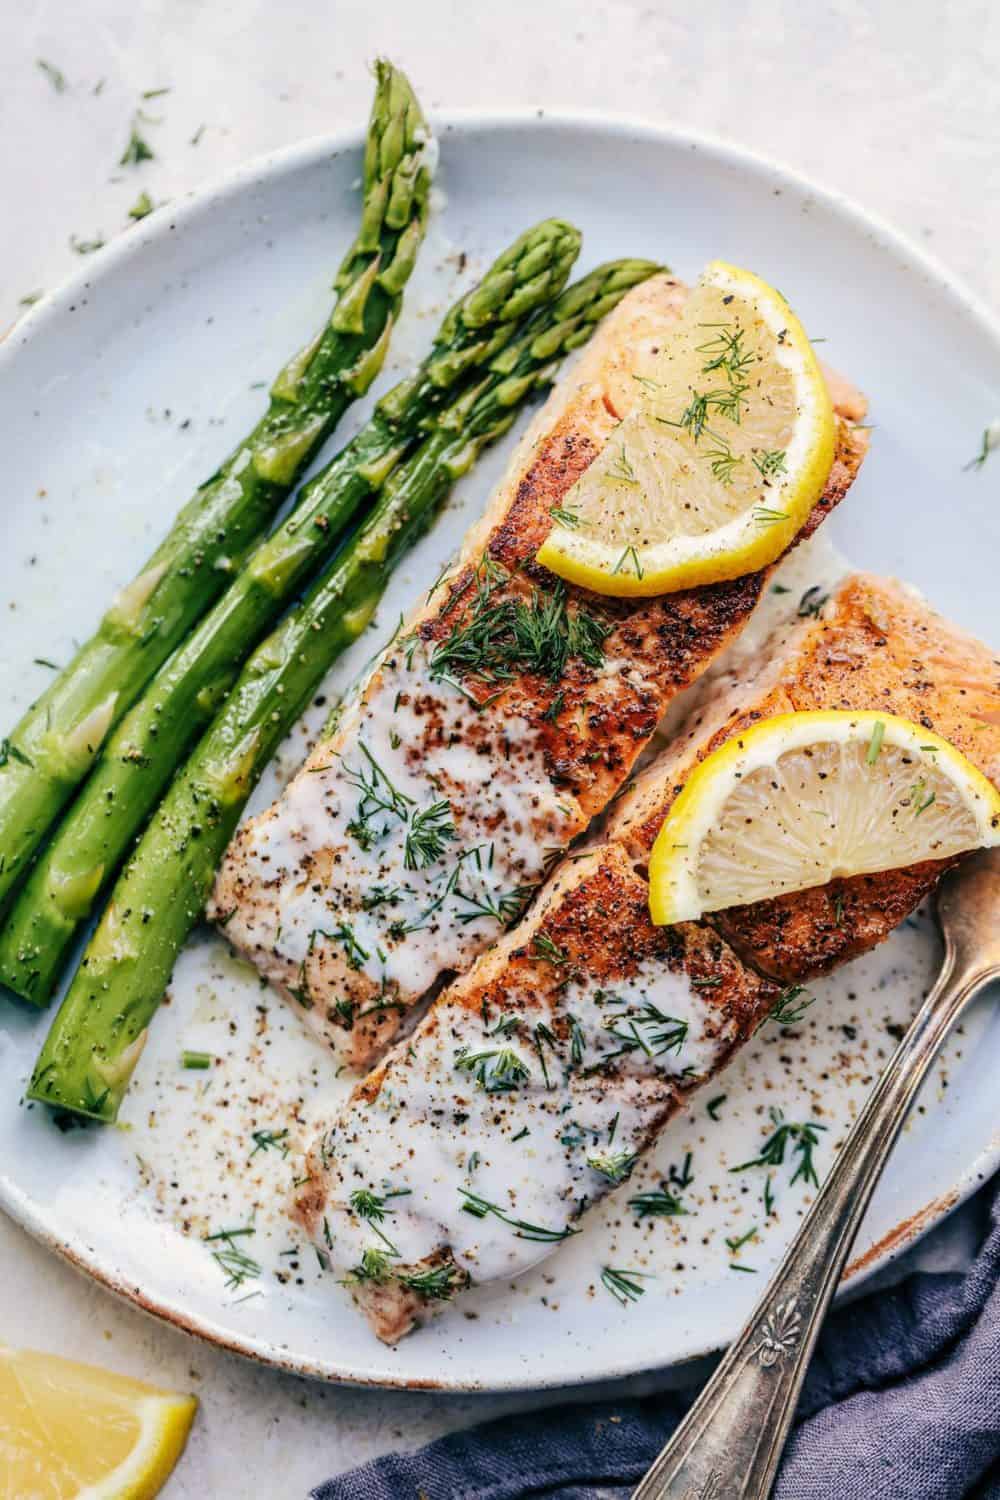 Pan Seared Salmon with a Creamy Lemon Dill Sauce on a white plate with asparagus and lemon slices.